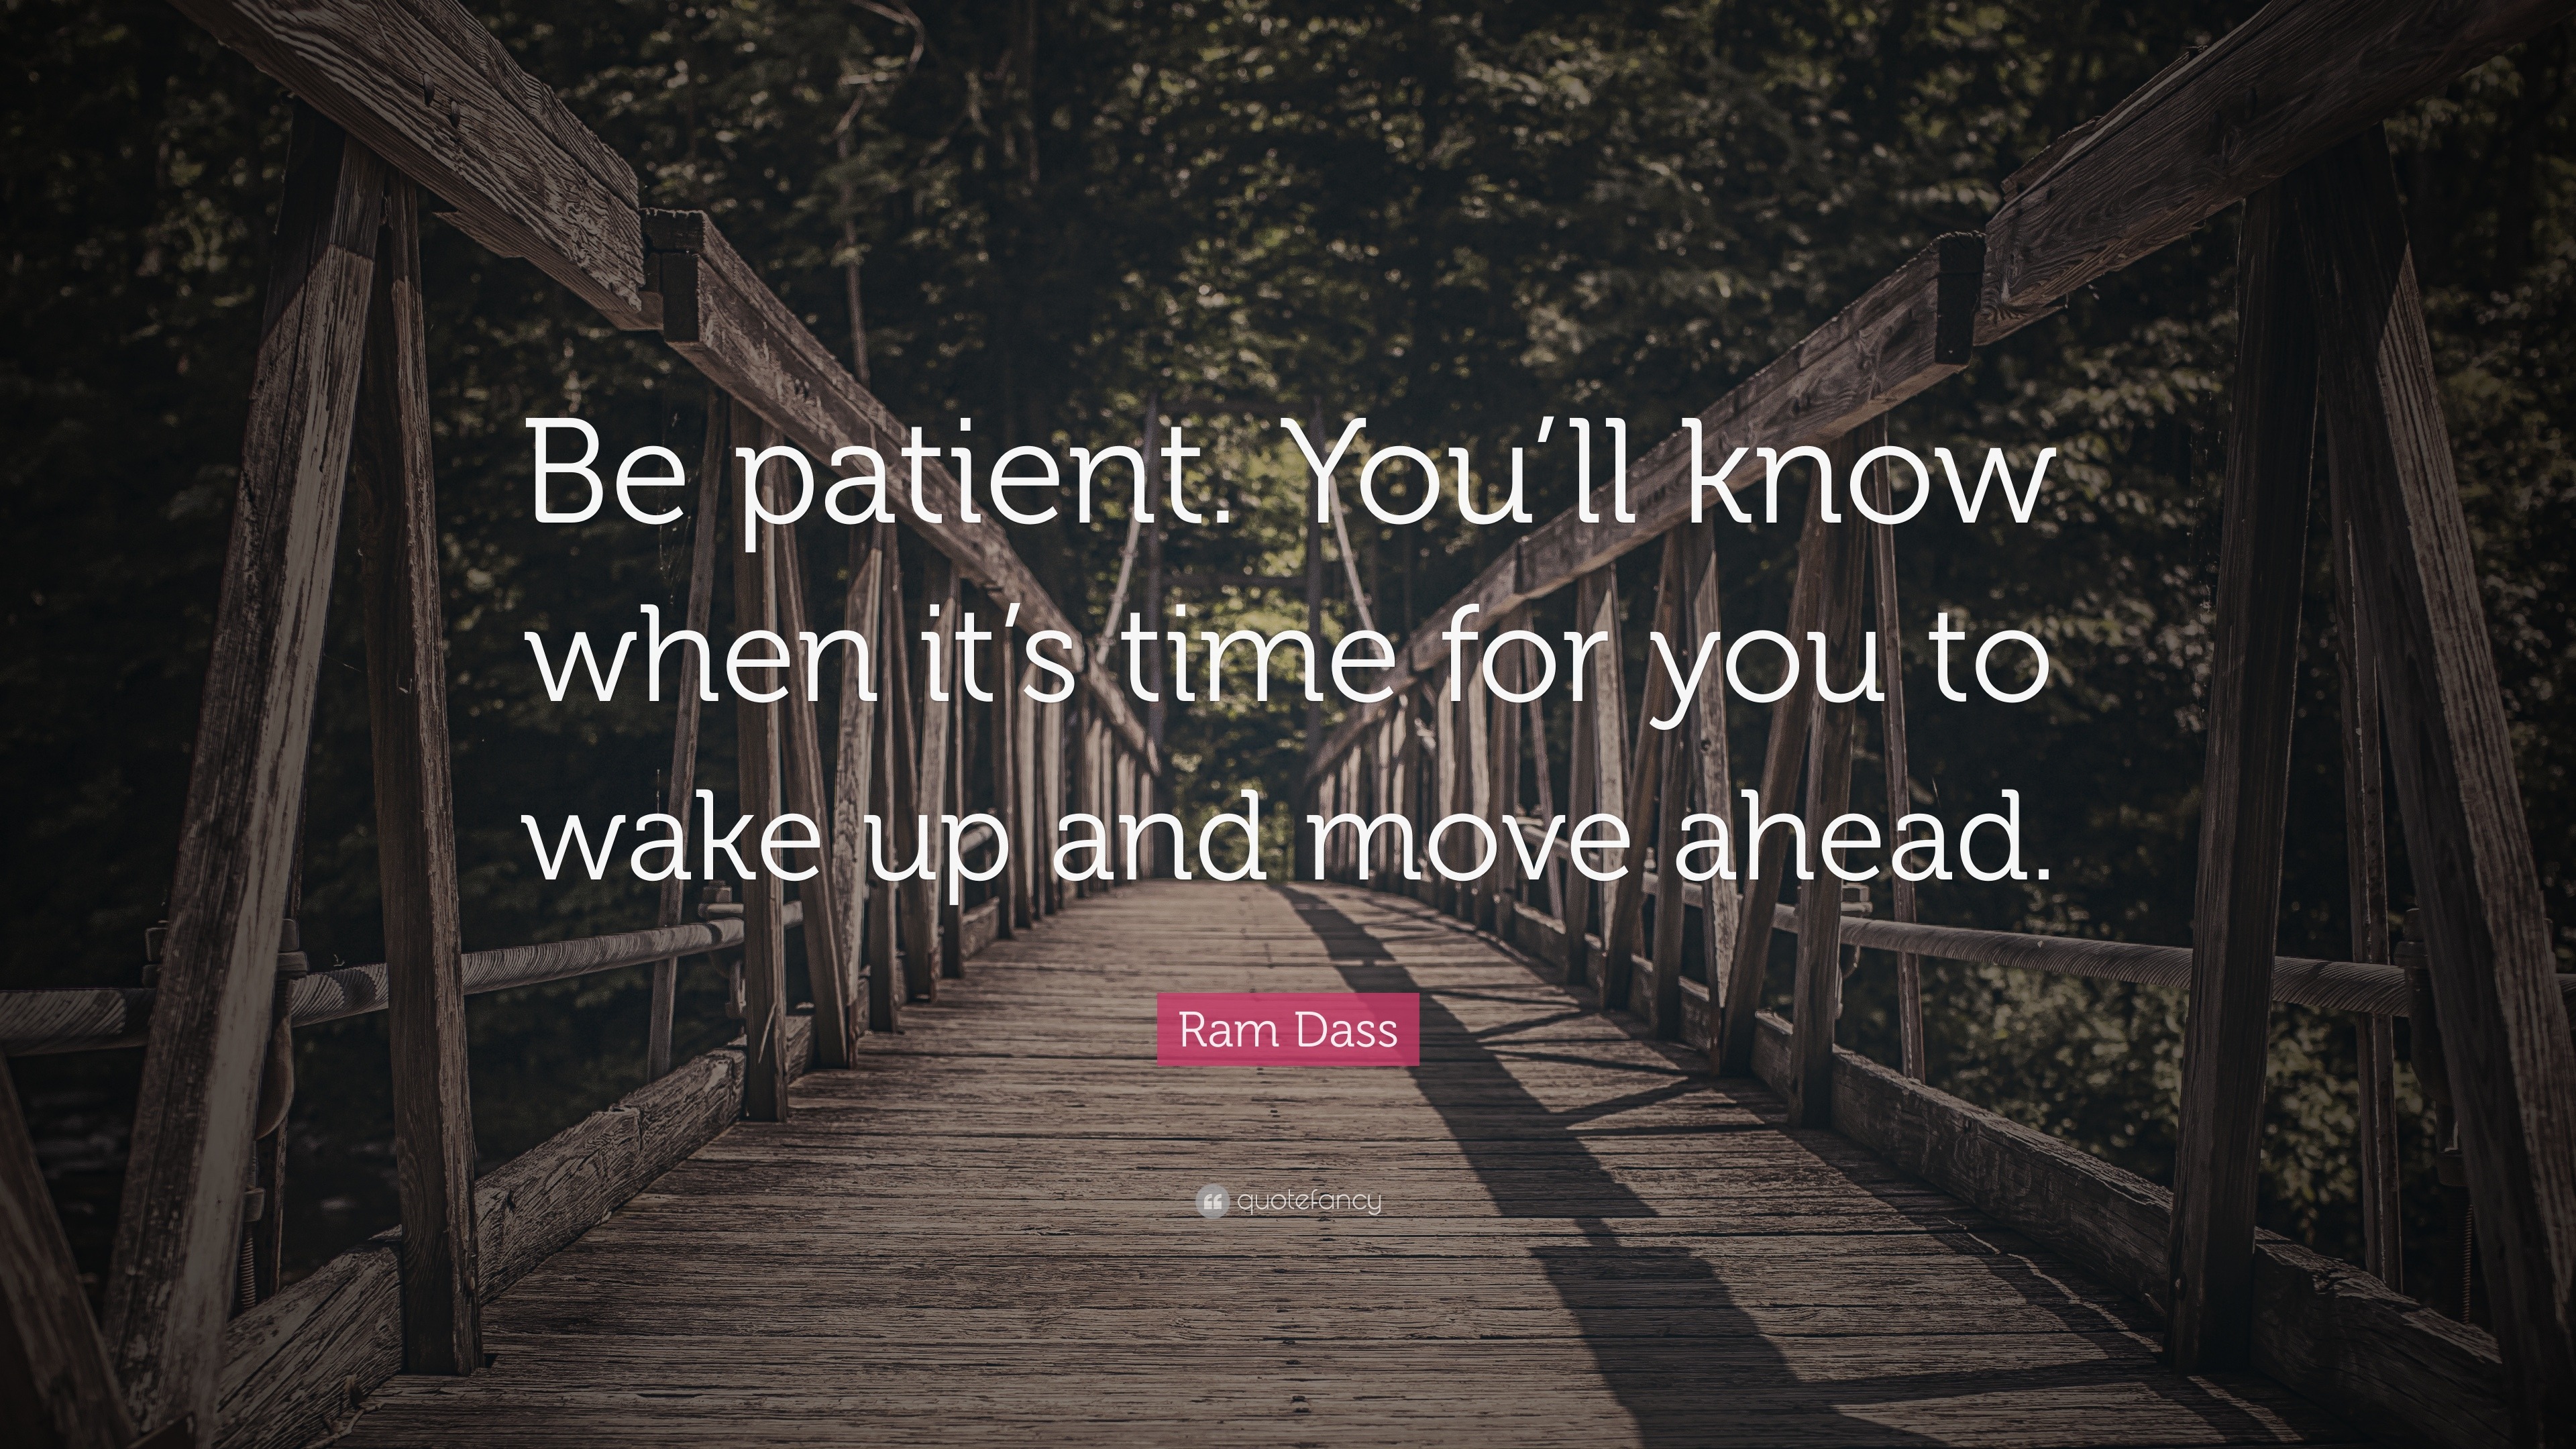 Ram Dass Quote “Be patient You ll know when it s time for